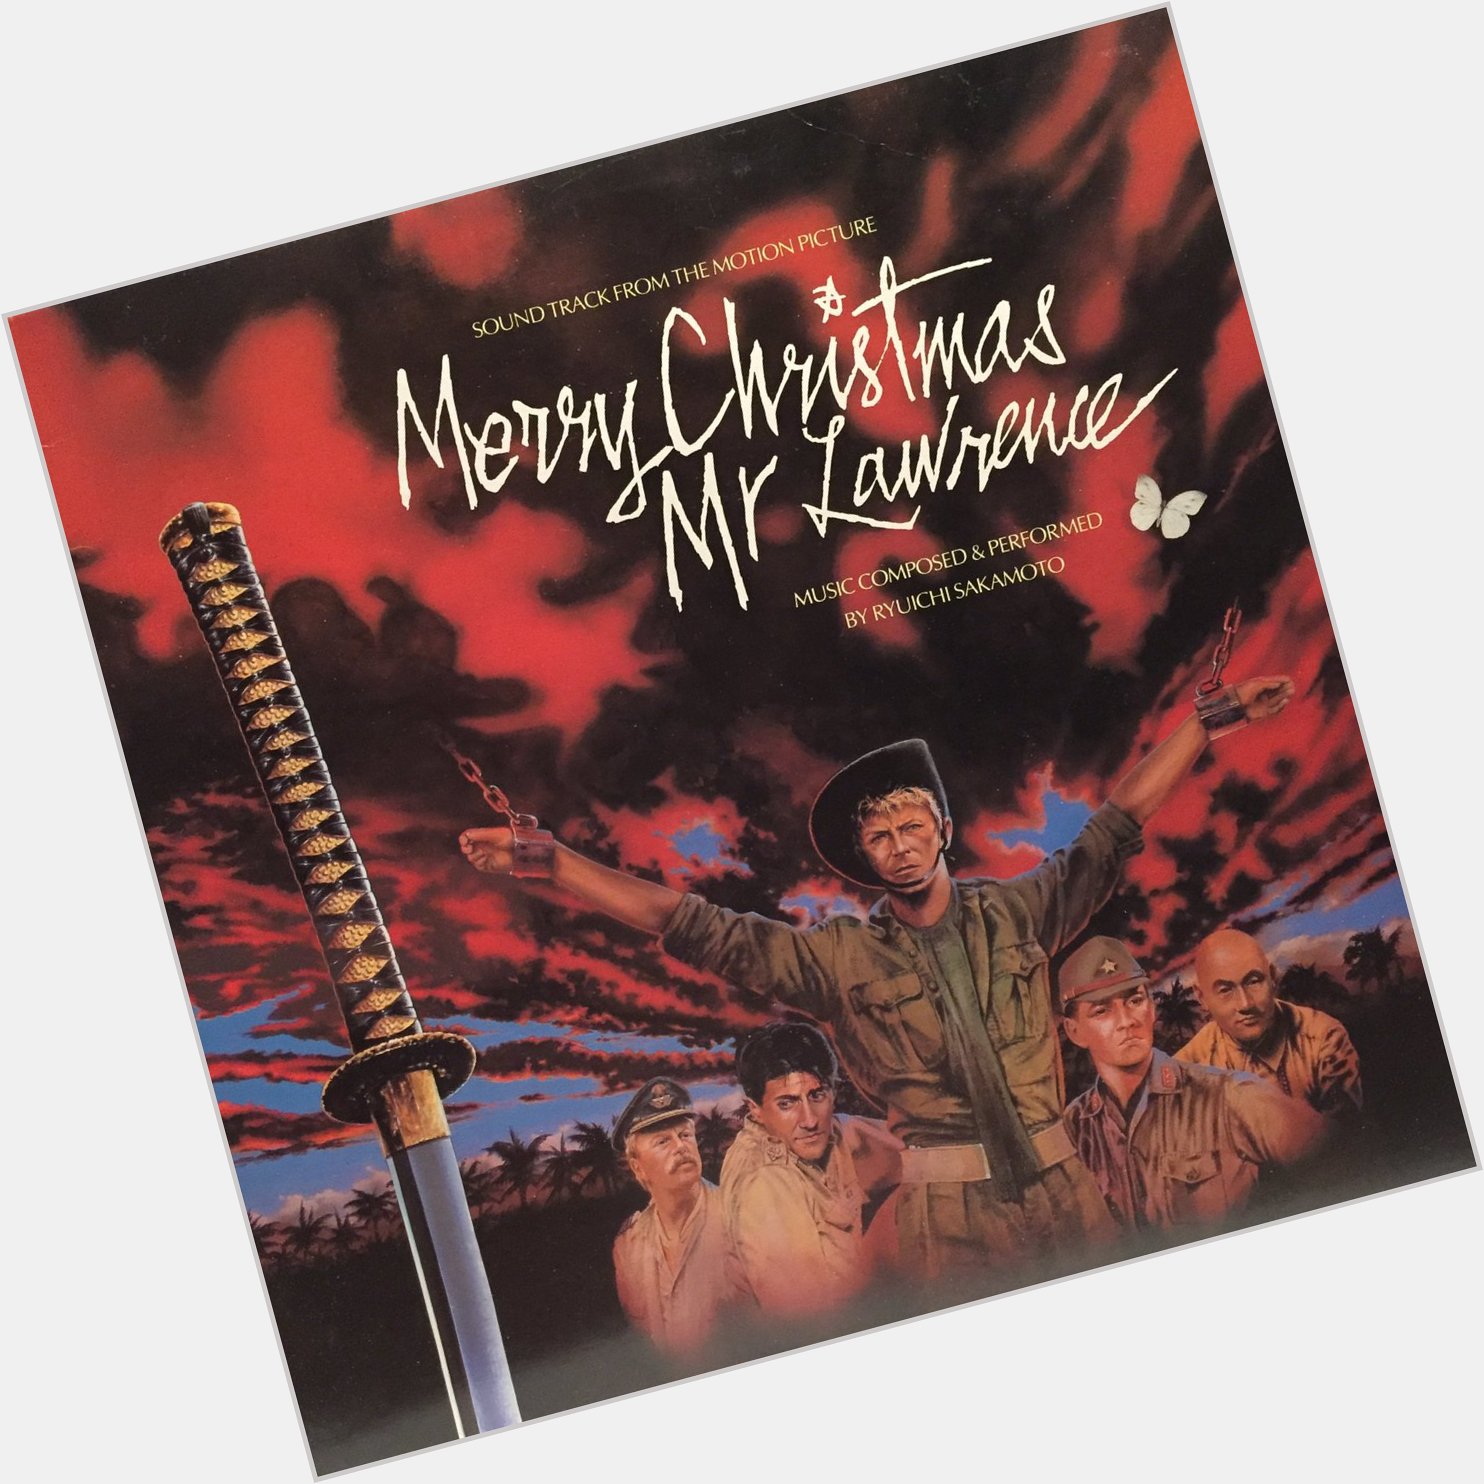 Happy birthday Mr. with MERRY CHRISTMAS MR LAWRENCE (vinyl and CD). 